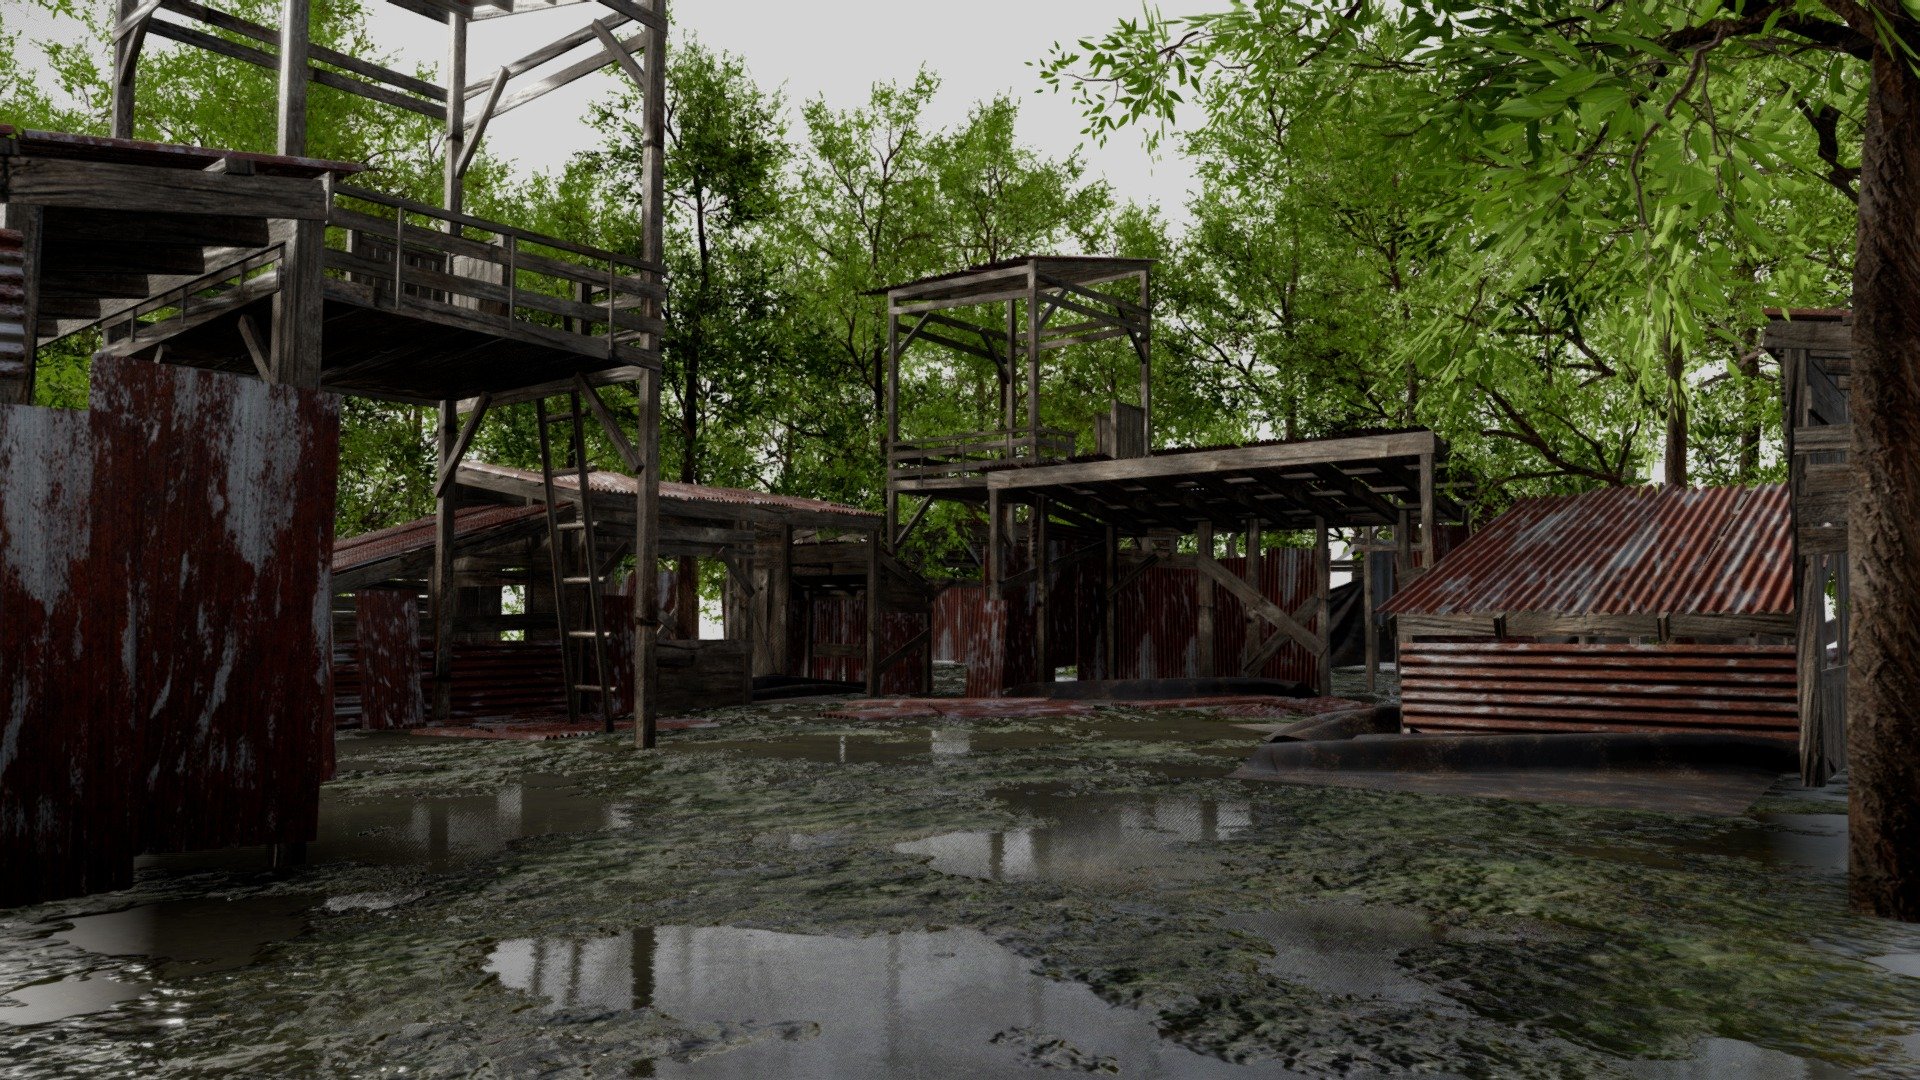 Abandoned Wooden Shacks with Trees 3D Scene
Step into the hauntingly beautiful &ldquo;Abandoned Wooden Shacks with Trees 3D Scene